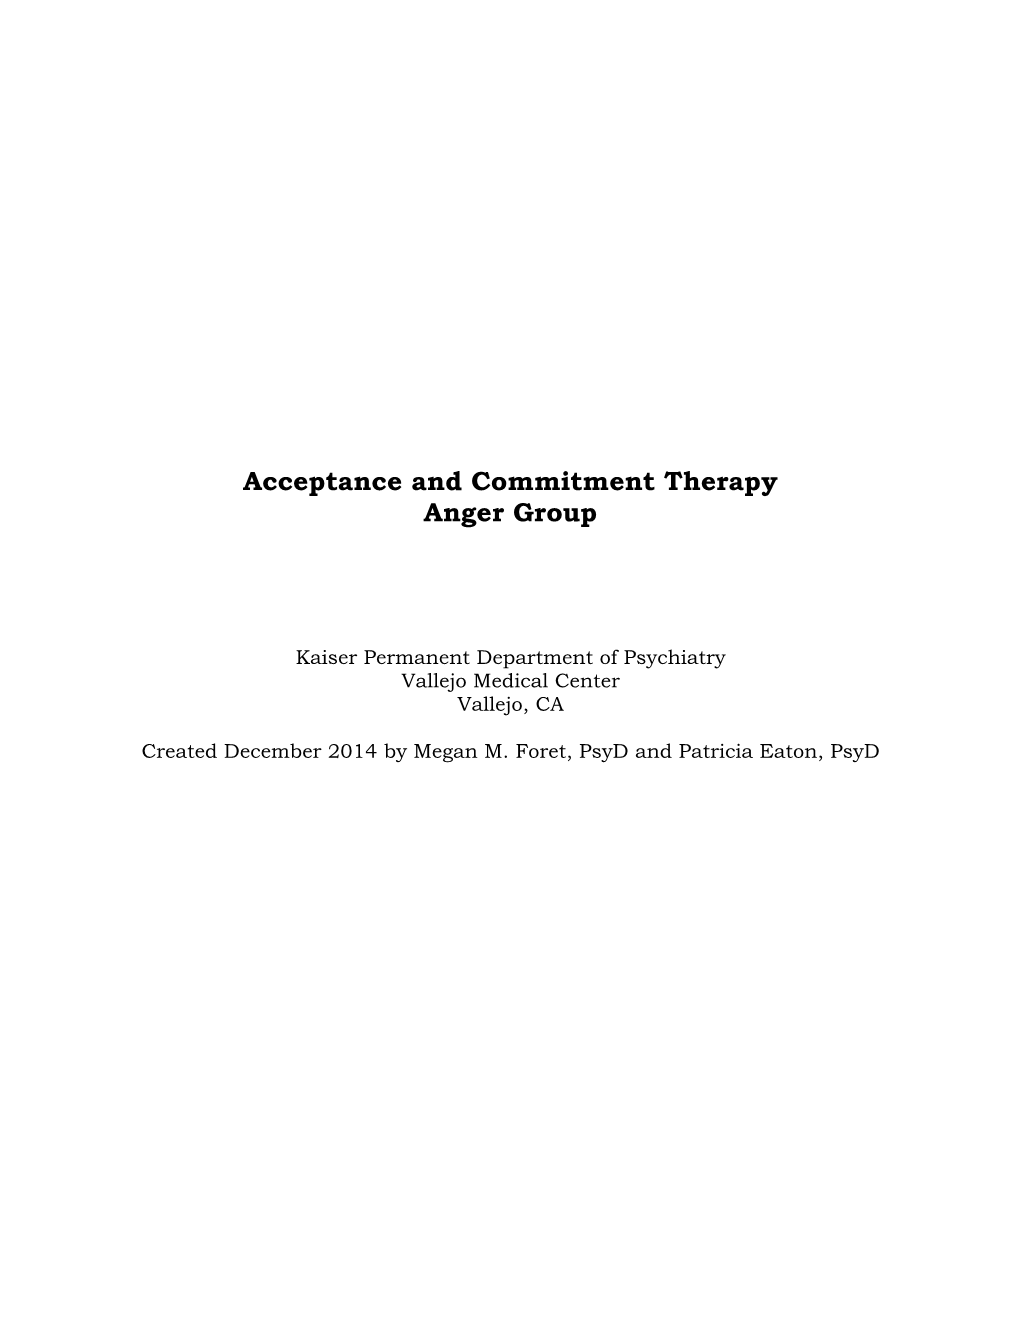 Acceptance and Commitment Therapy Anger Group